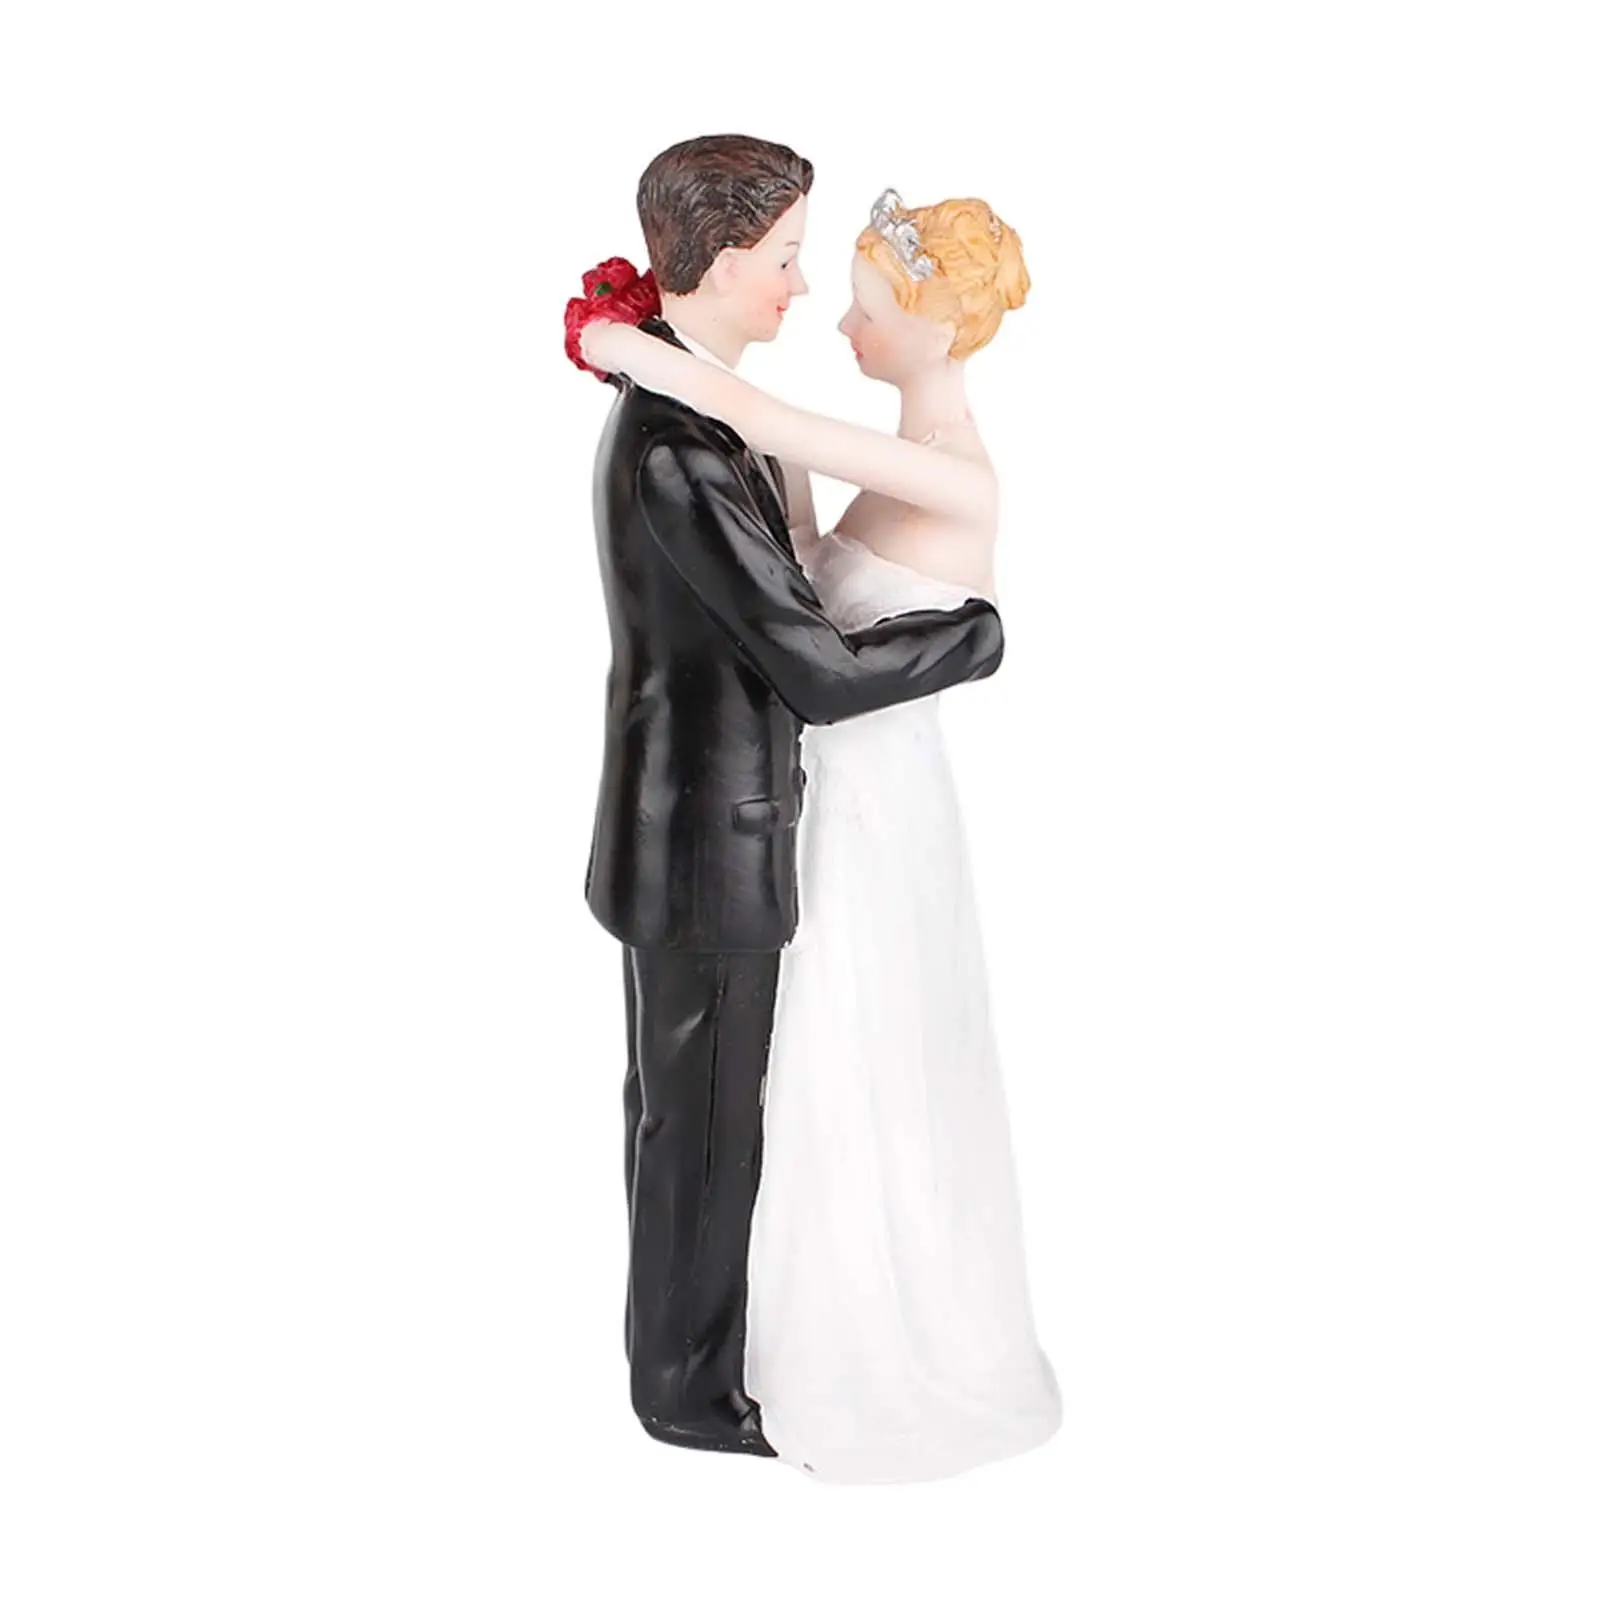 Couple Figures Decorations Gift 1 Piece Resin for Ready to Marry Anniversaries Weddings Engagement Parties Bridal Showers